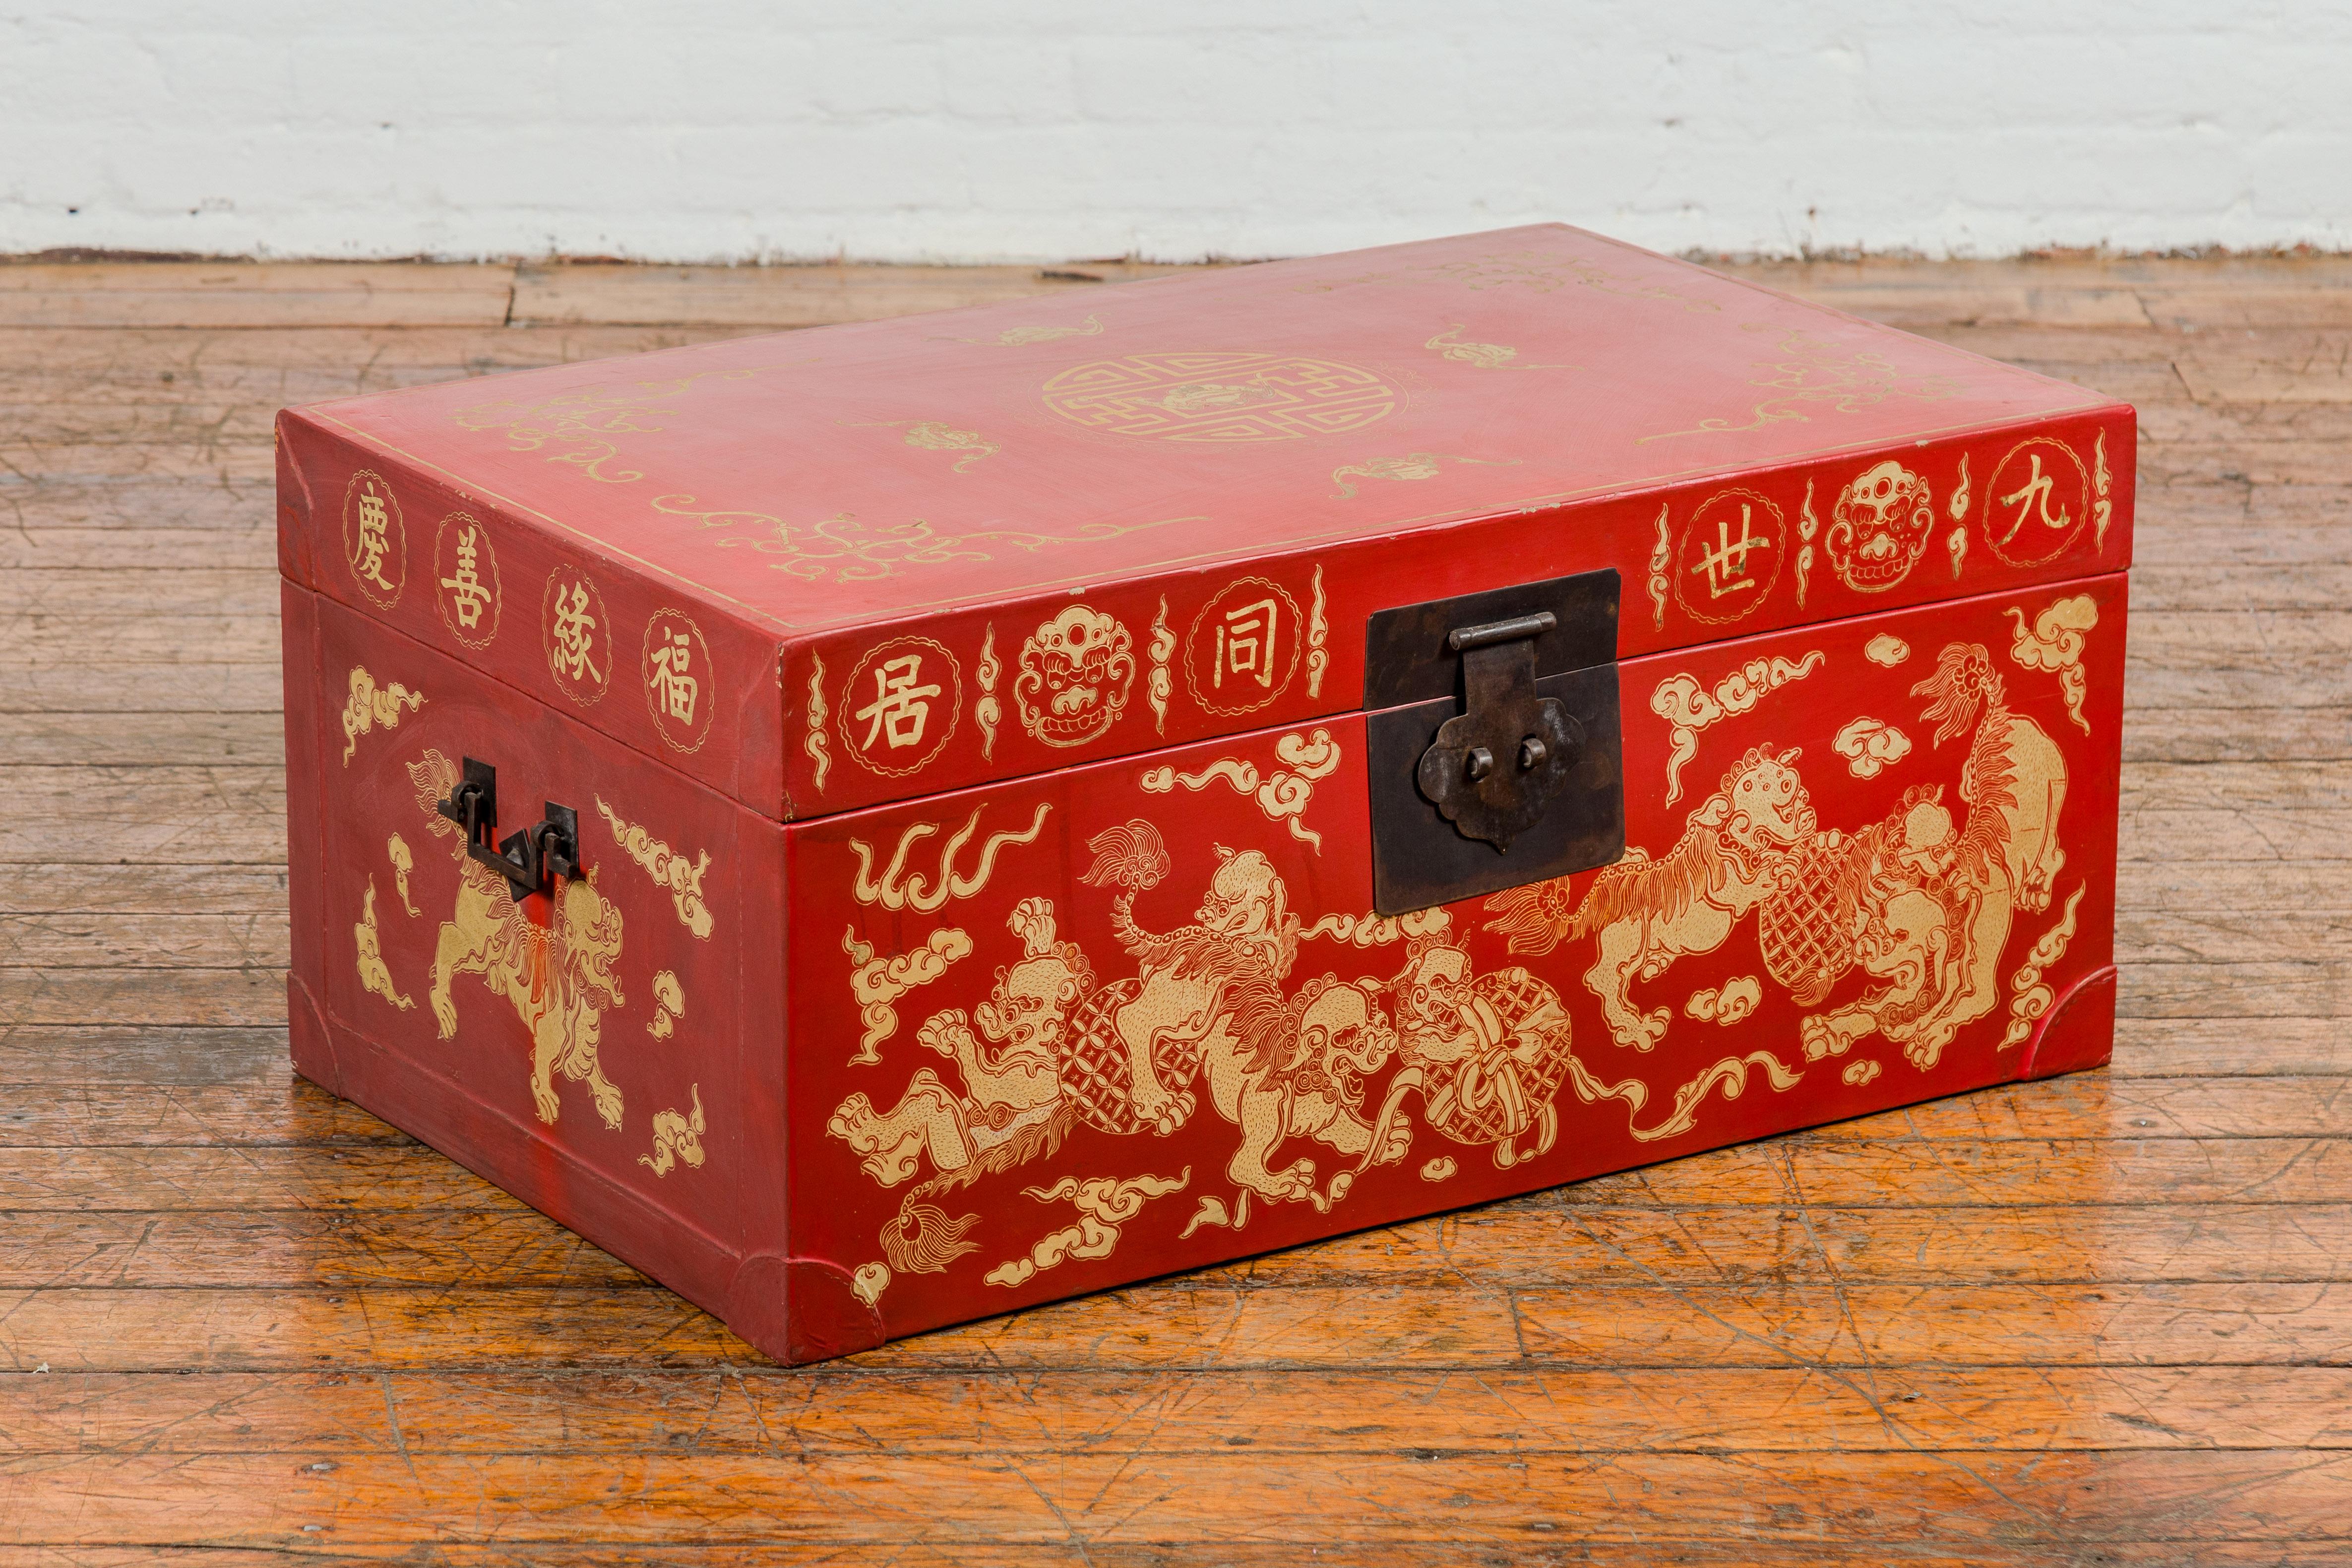 A vintage Chinese red lacquer blanket chest with gilded bat, guardian lions and cloud motifs. Discover the vibrant allure of this vintage Chinese red lacquer blanket chest, a piece that melds functionality with auspicious design. Its robust form is